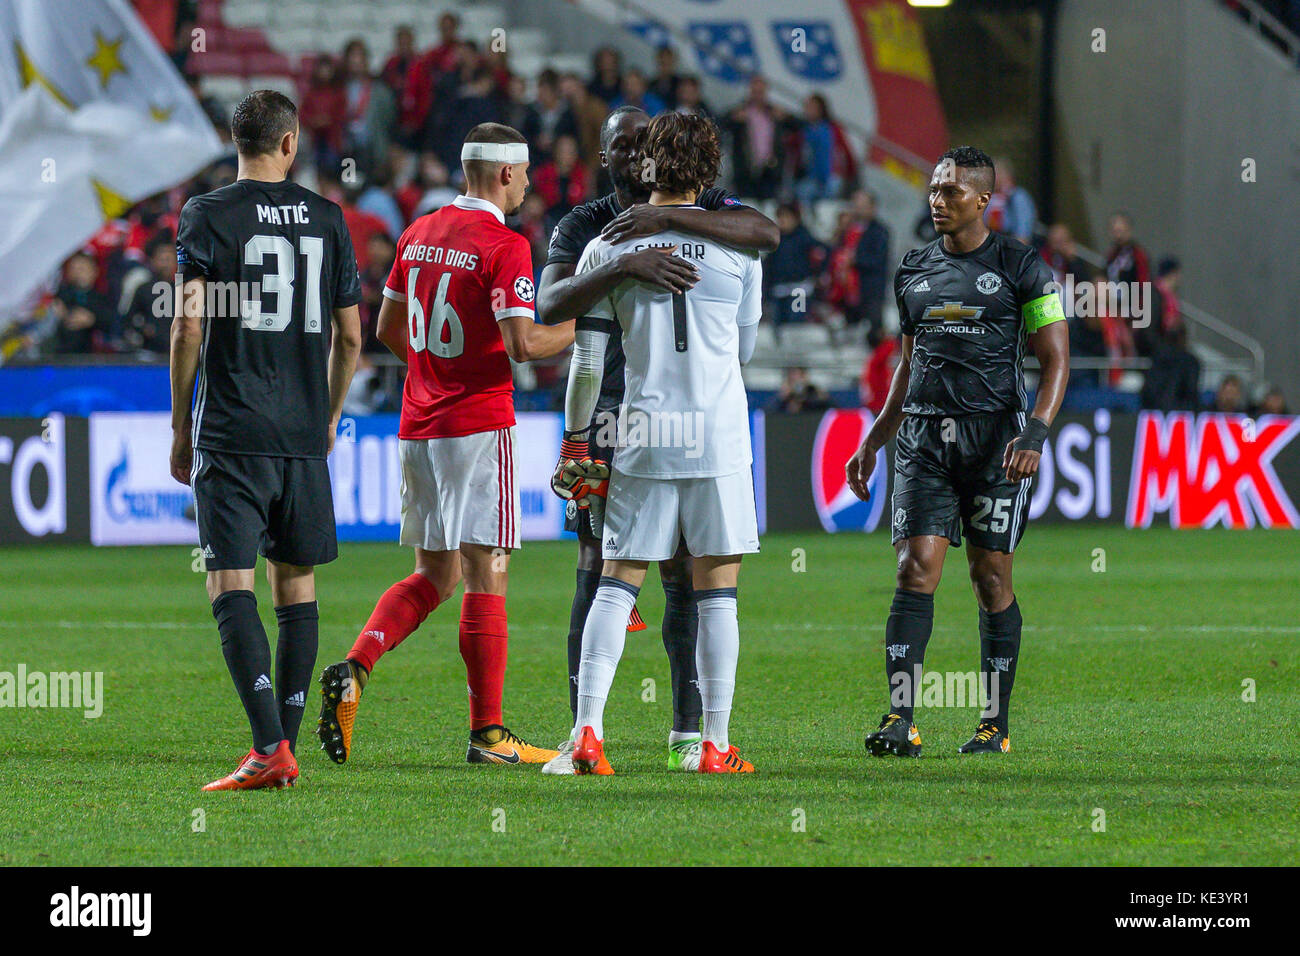 October 18, 2017. Lisbon, Portugal. Manchester United's forward from Belgium Romelu Lukaku (9) and Benfica's goalkeeper from Belgium Mile Svilar (1) during the game of the 3rd round of the UEFA Champions League Group A, SL Benfica v Manchester United FC Credit: Alexandre de Sousa/Alamy Live News Stock Photo